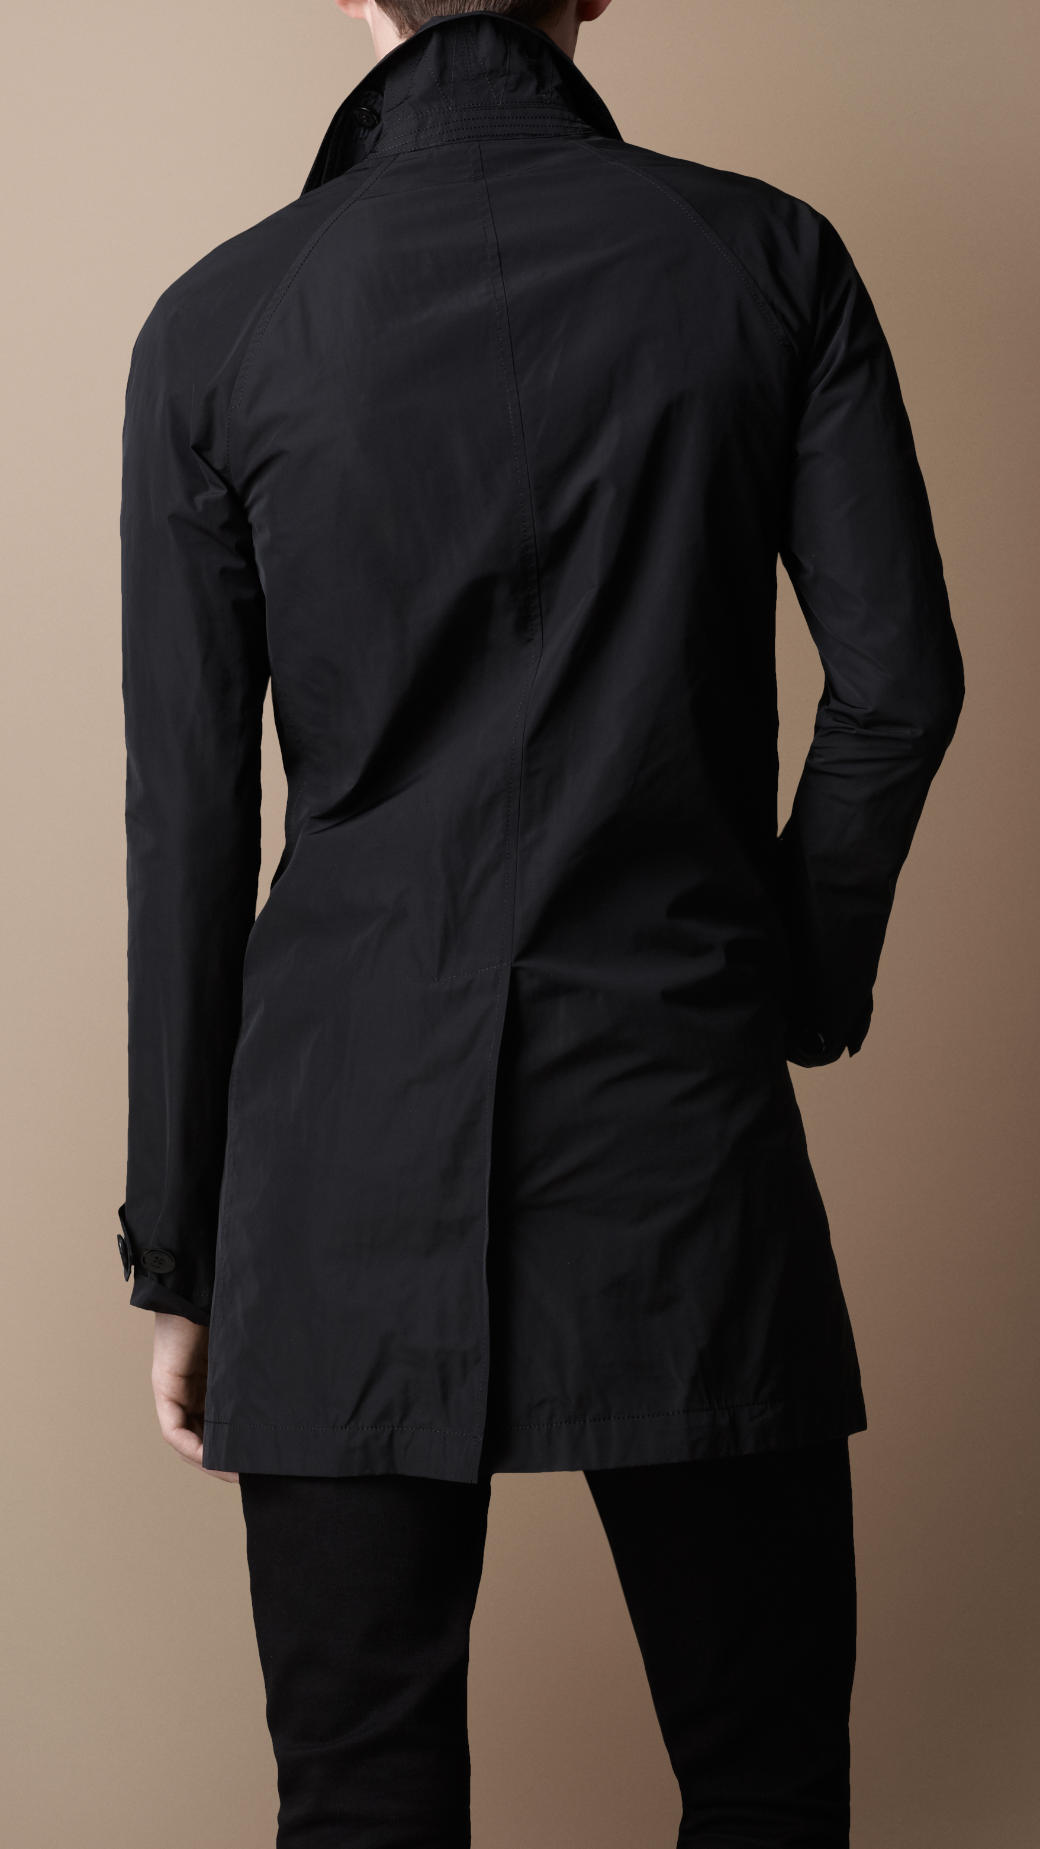 Lyst - Burberry Brit Midlength Single Breasted Trench Coat in Black for Men